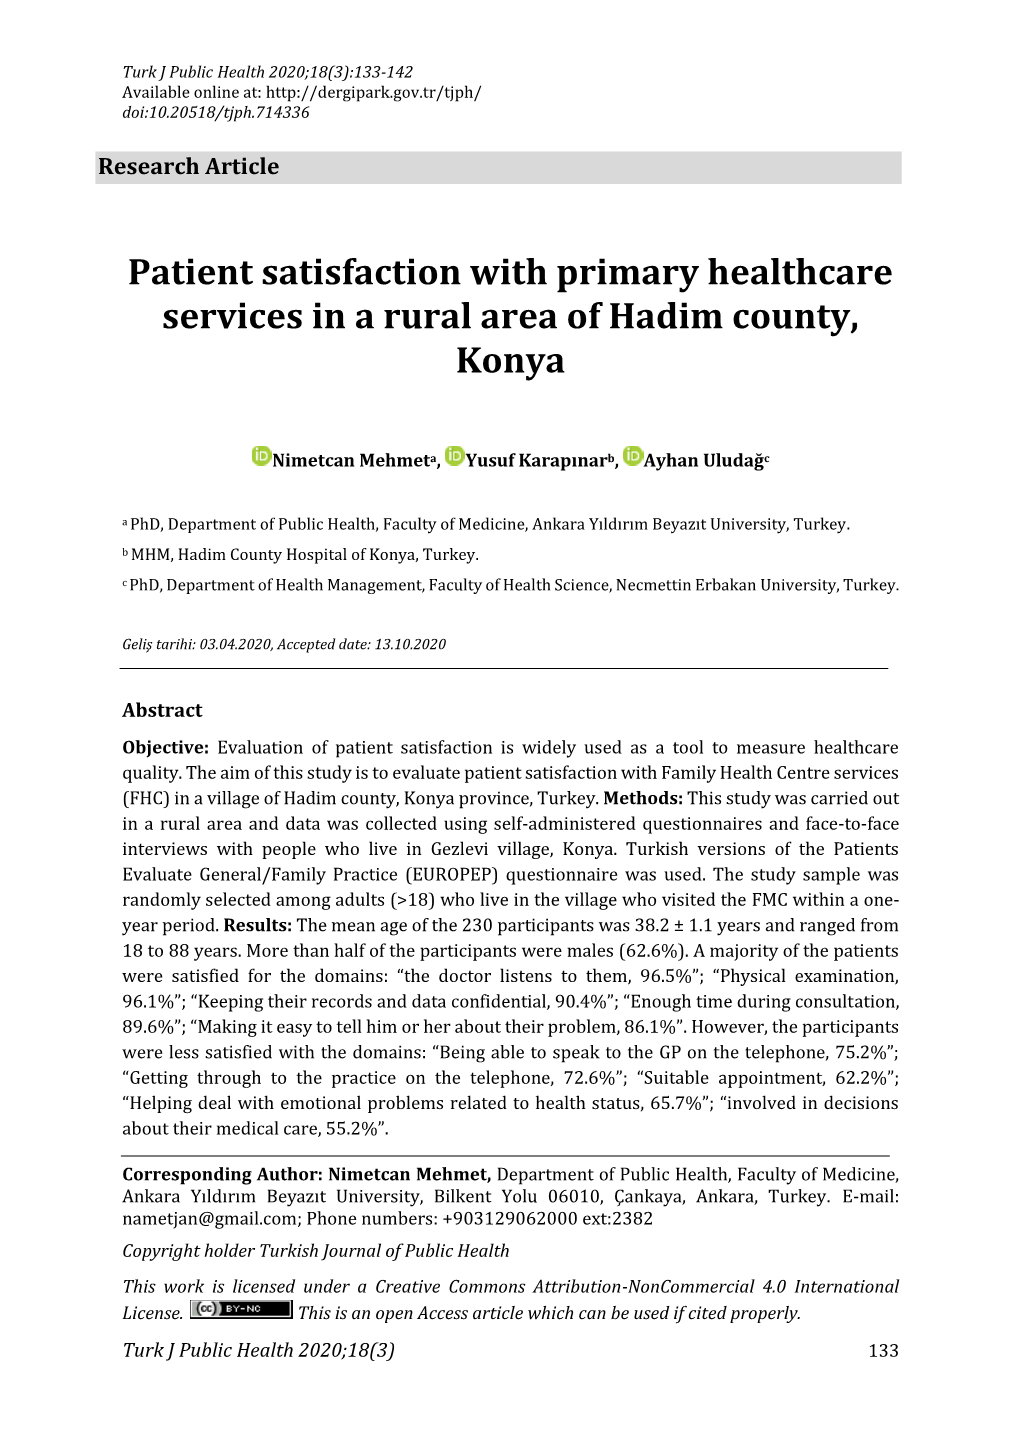 Patient Satisfaction with Primary Healthcare Services in a Rural Area of Hadim County, Konya